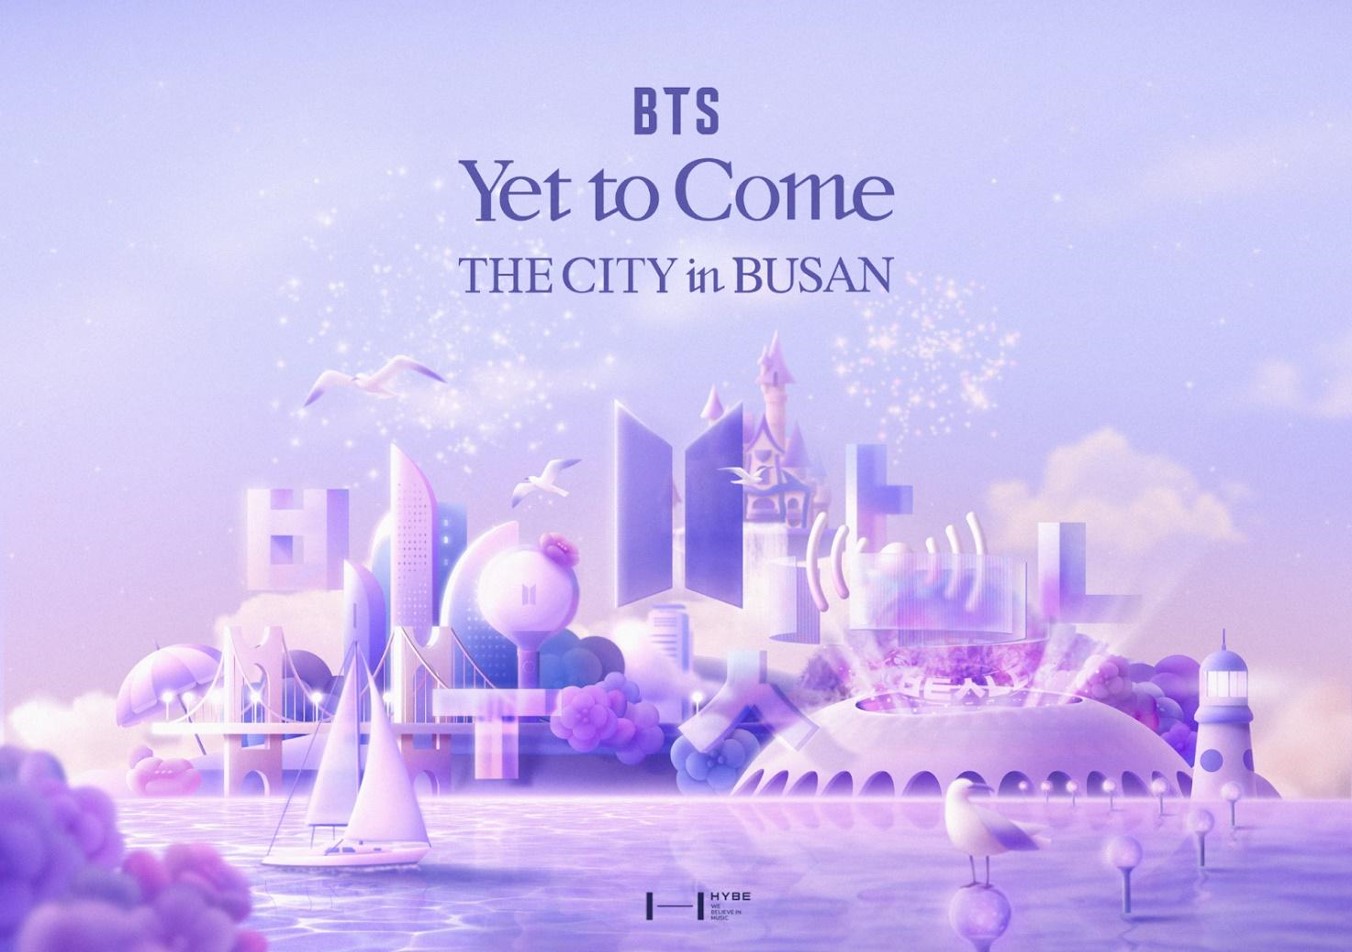 HYBE、「BTS＜Yet To Come＞ THE CITY in BUSAN」を開催～都市全体をBTSで染める『THE CITY』プロジェクト、釜山で開催！～